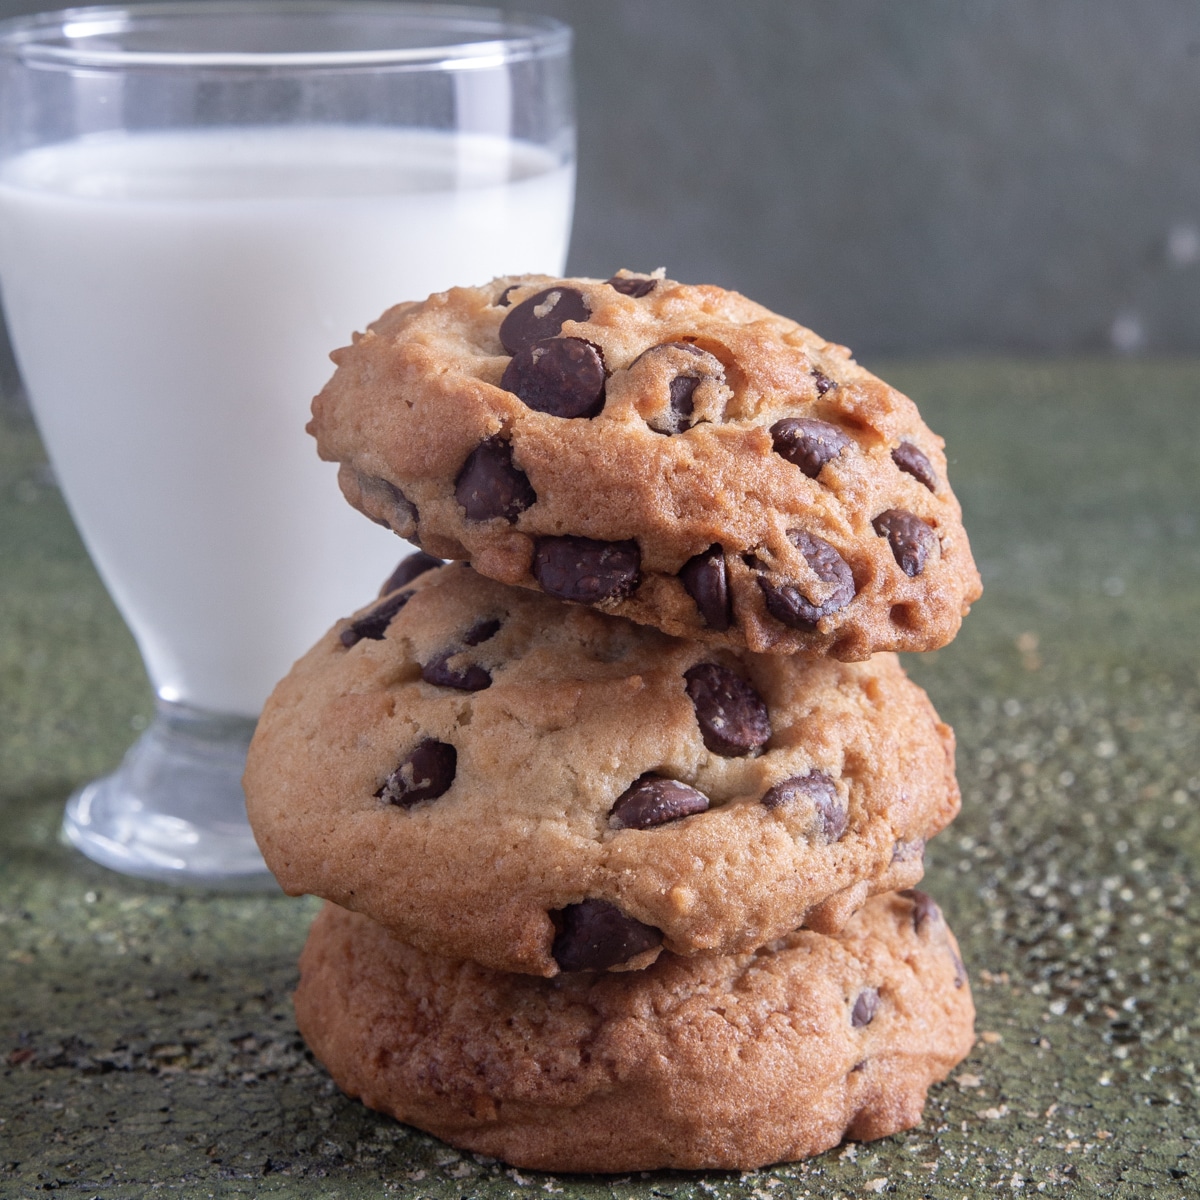 3 cookies stacked with a glass of milk.